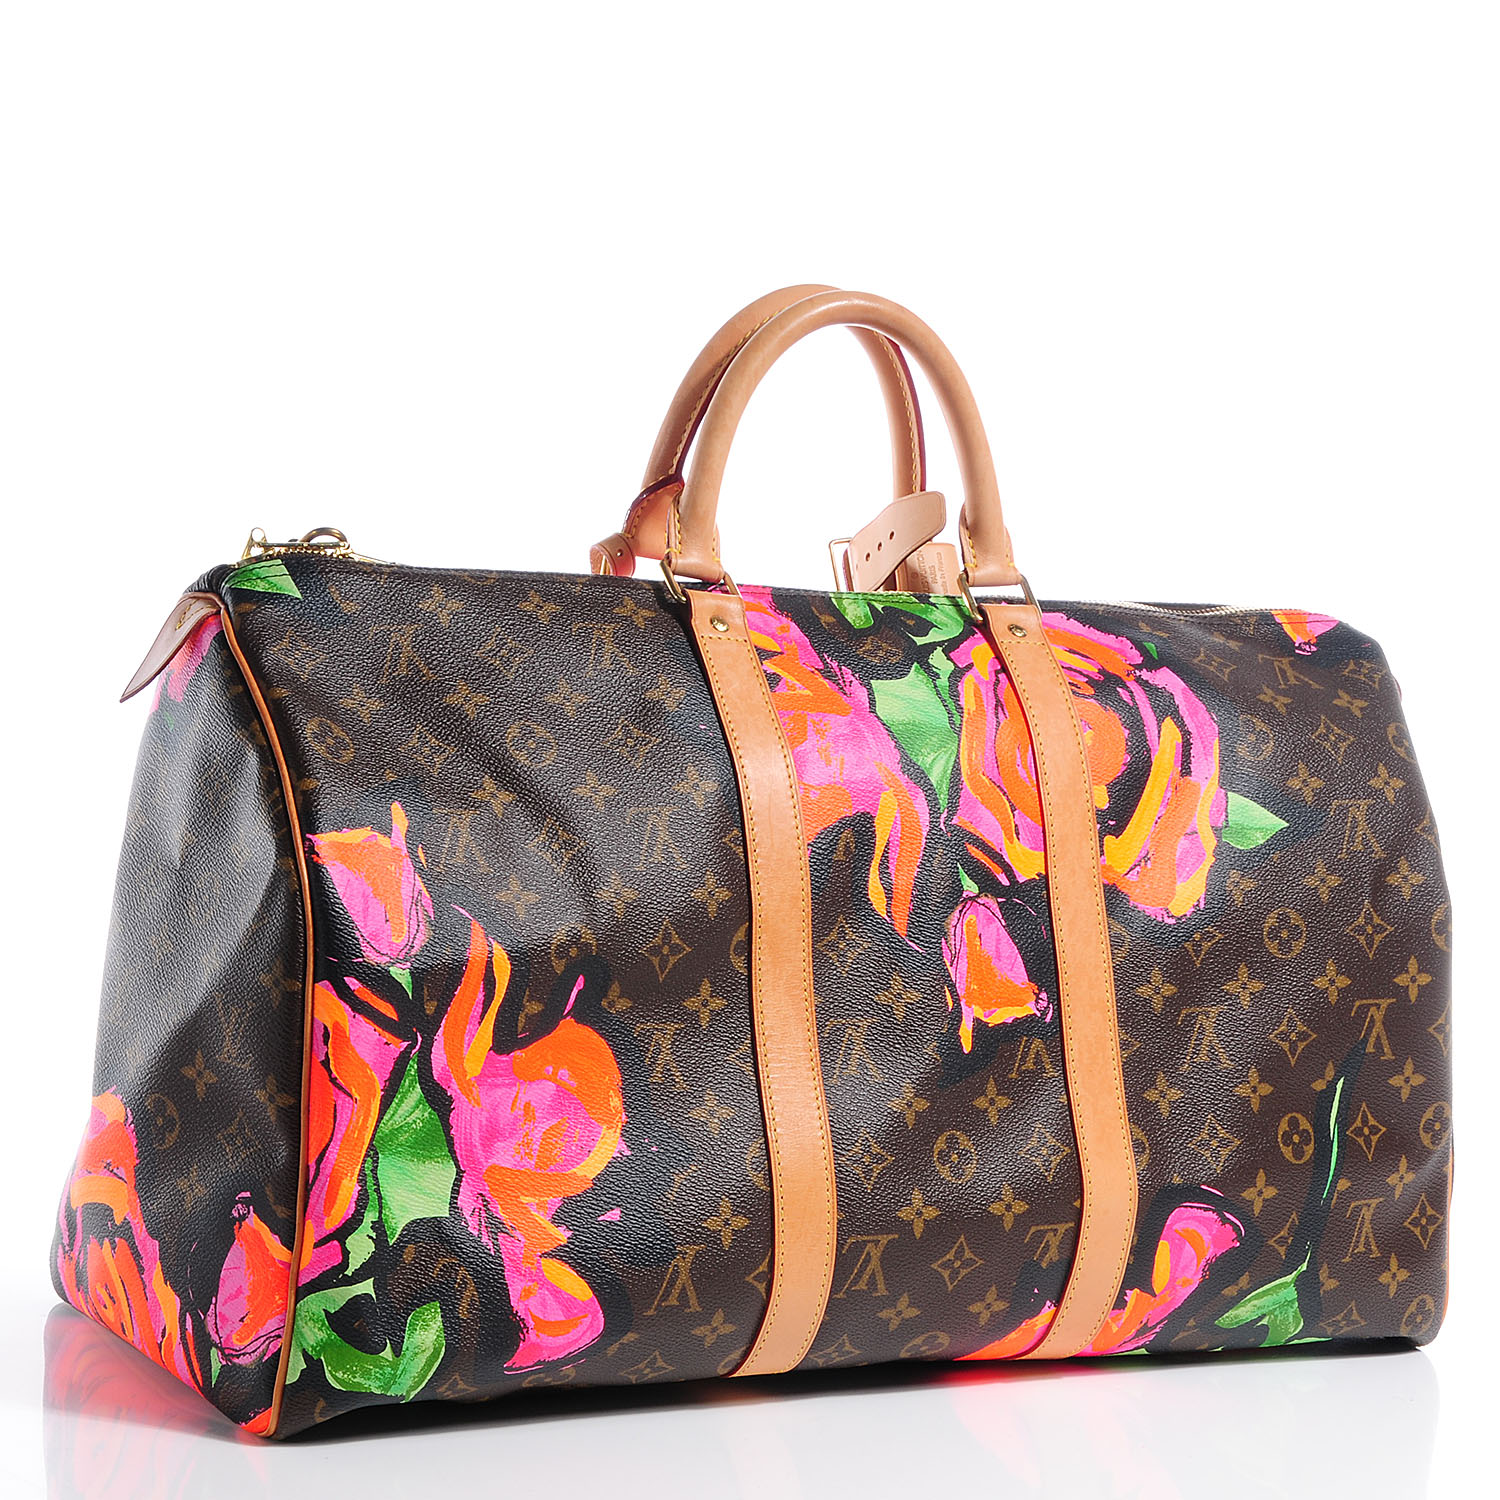 LOUIS VUITTON Stephen Sprouse Roses Keepall 45 66026